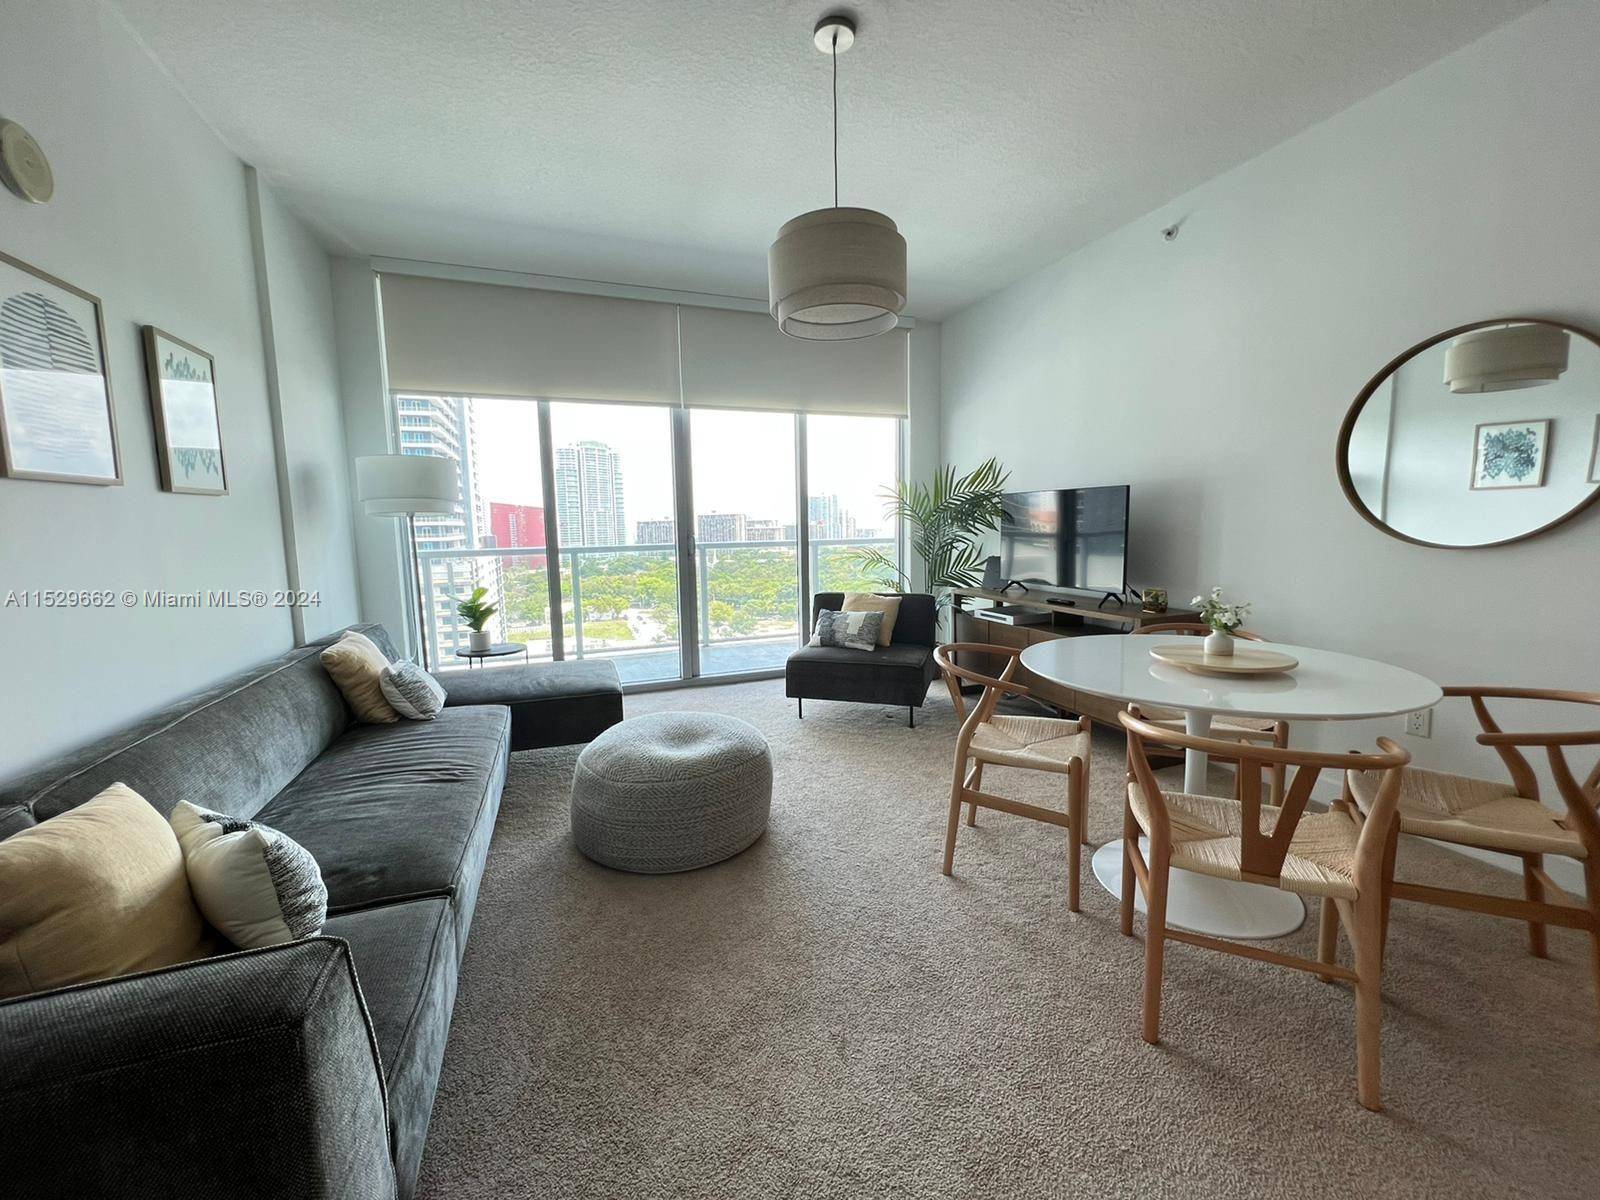 Welcome to this stylish and fully furnished two bedroom two bathroom apartment in the heart of Brickell.